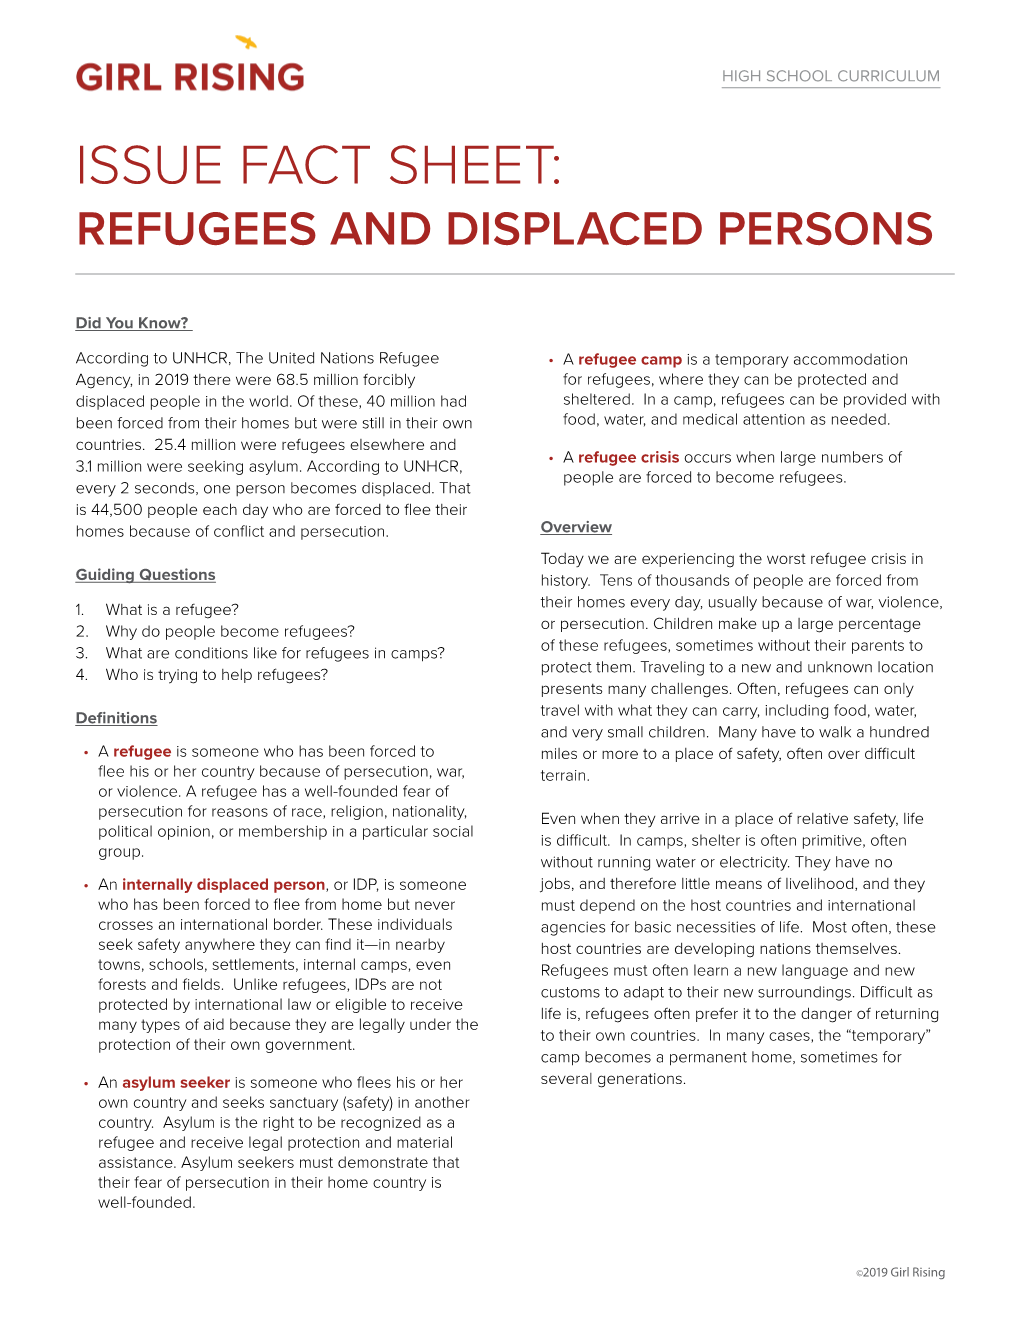 Issue Fact Sheet: Refugees and Displaced Persons